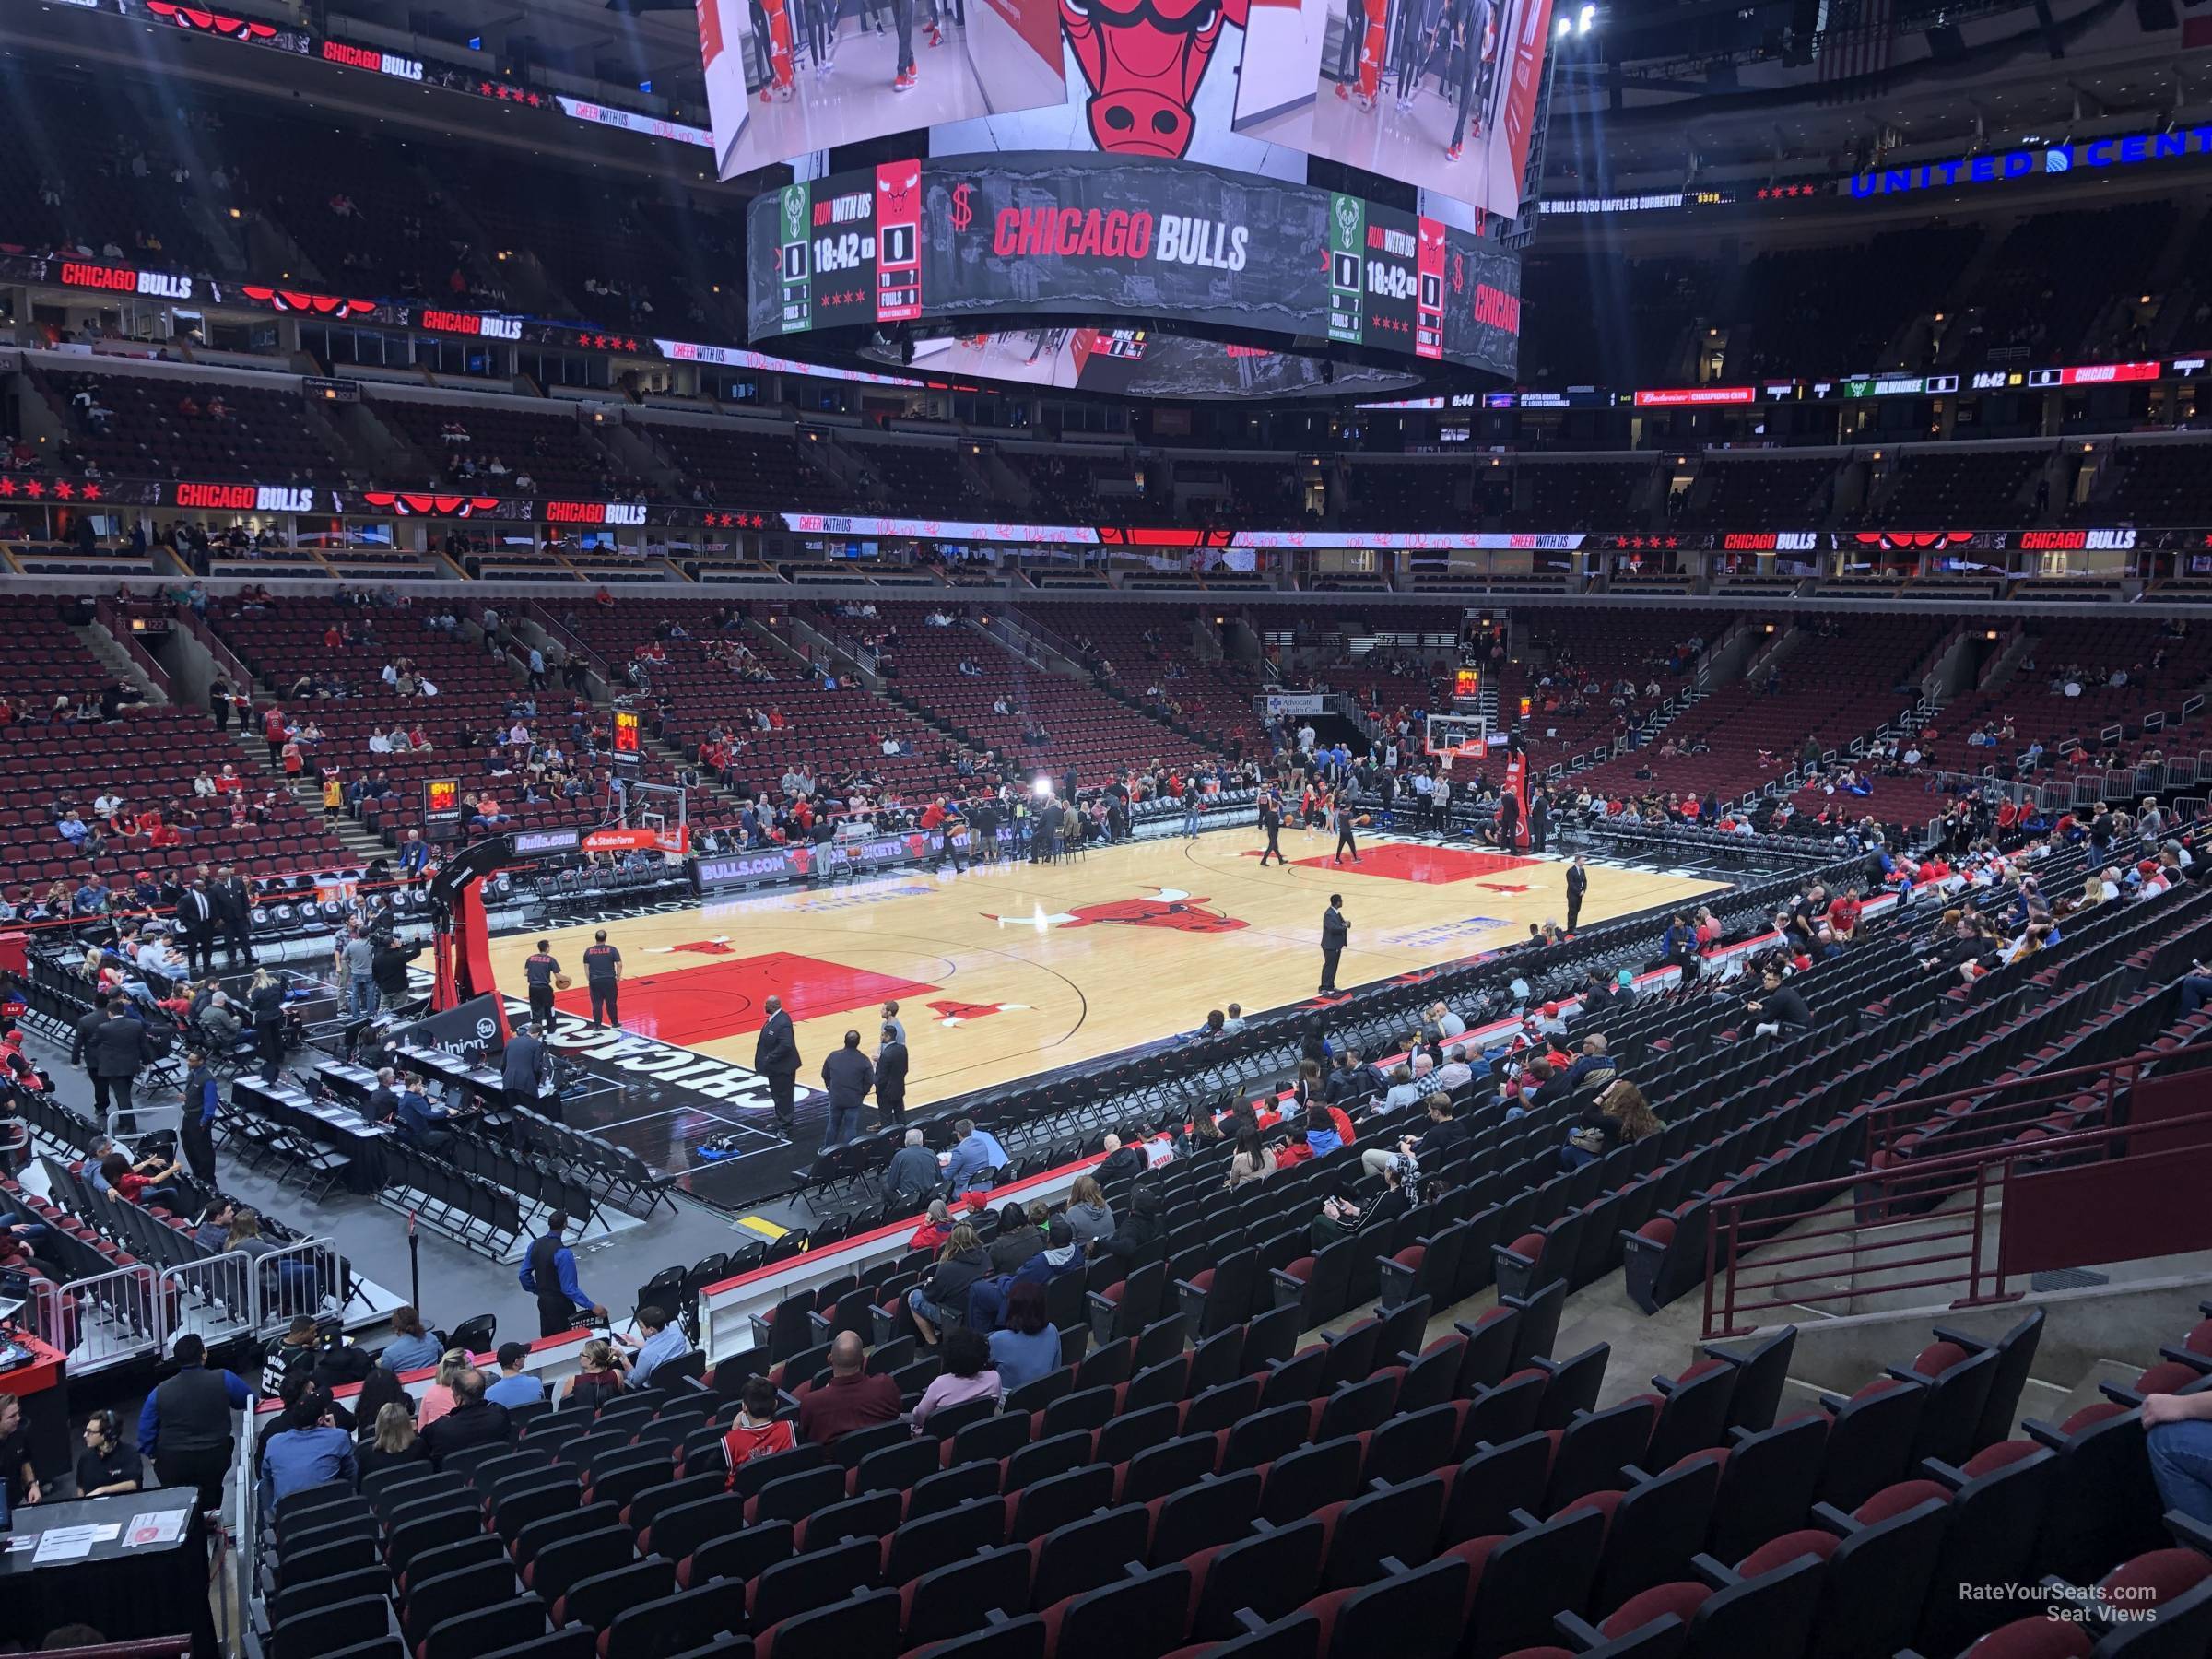 United Center Section 114 - Chicago Bulls - RateYourSeats.com